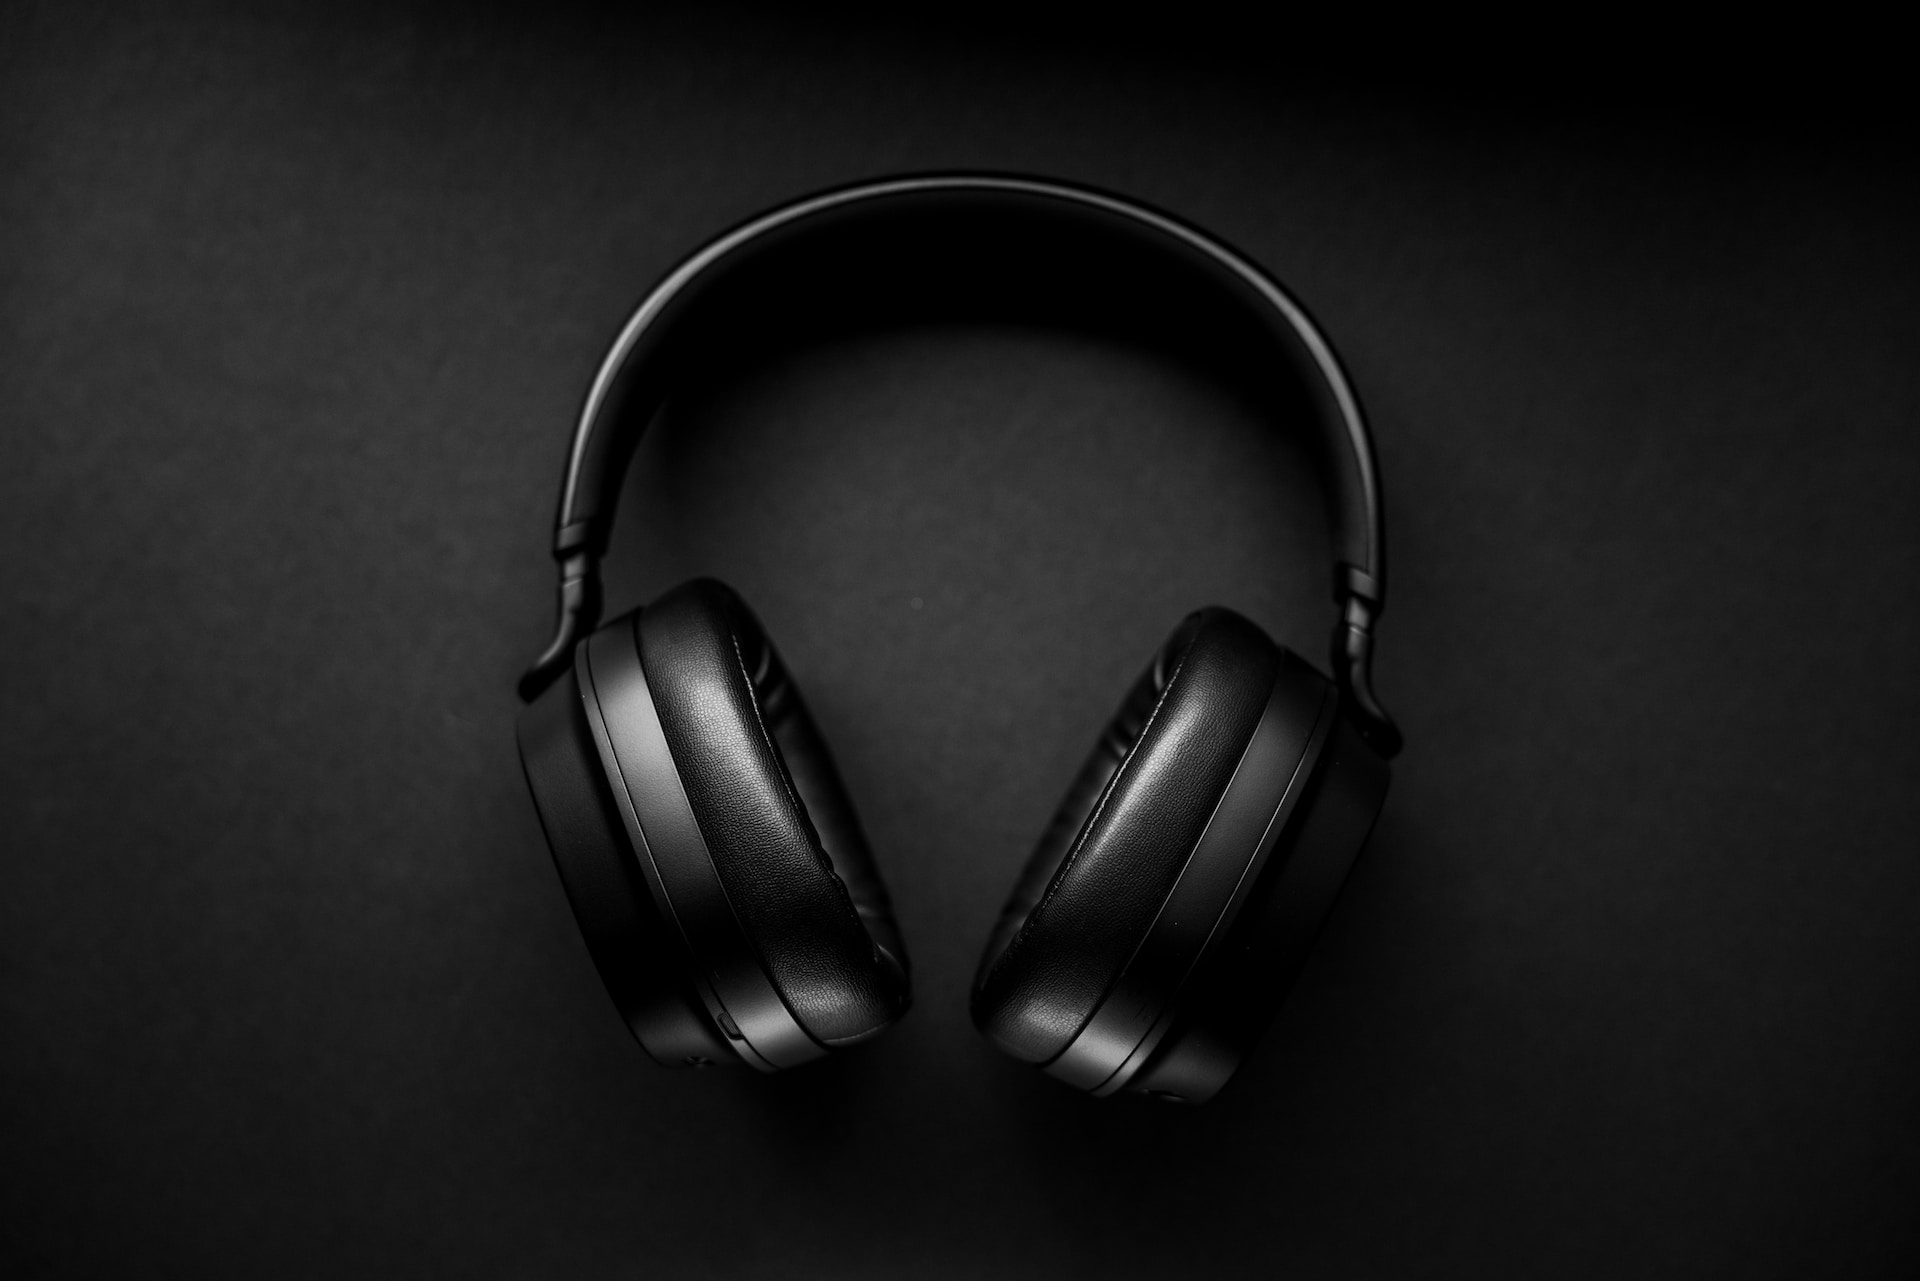 The Best and Worst Sound Quality Headphones